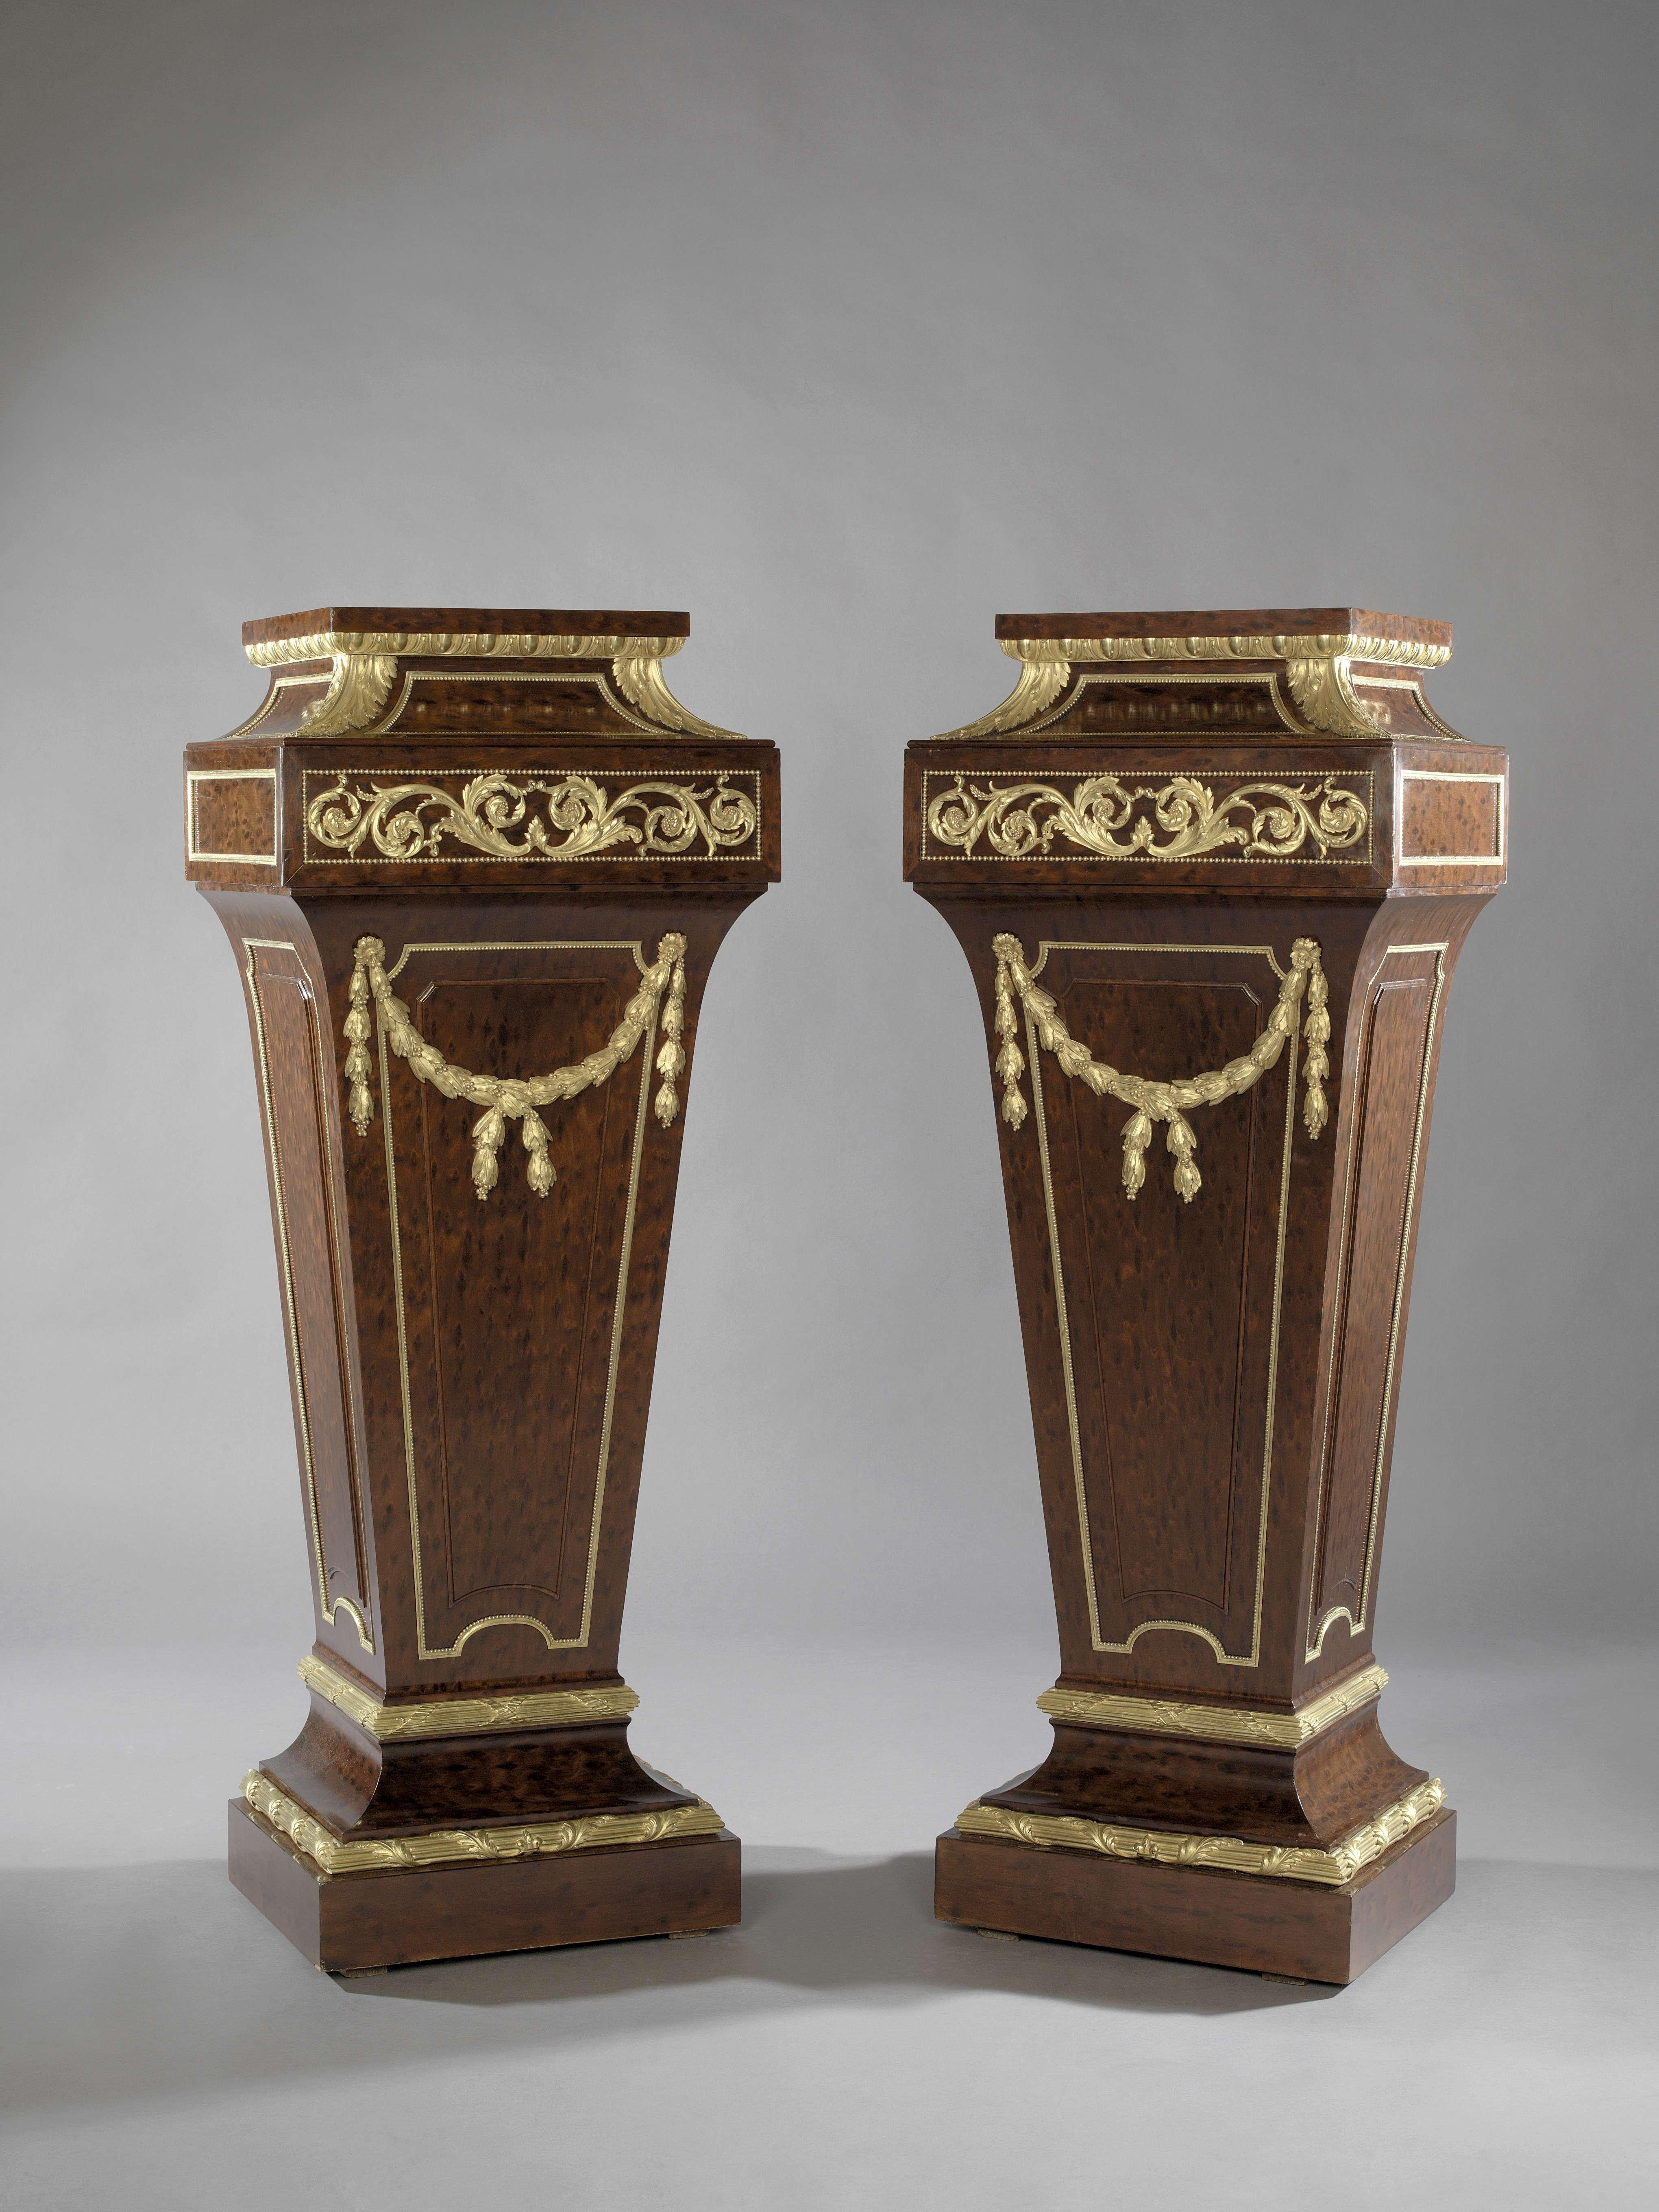 A very fine pair of Louis XVI Style gilt bronze mounted mahogany pedestals, attributed to Sormani. 

French, circa 1870.

The pedestals are of tapering form with finely chiselled gilt bronze mounts of bell husk swags and scrolling acanthus